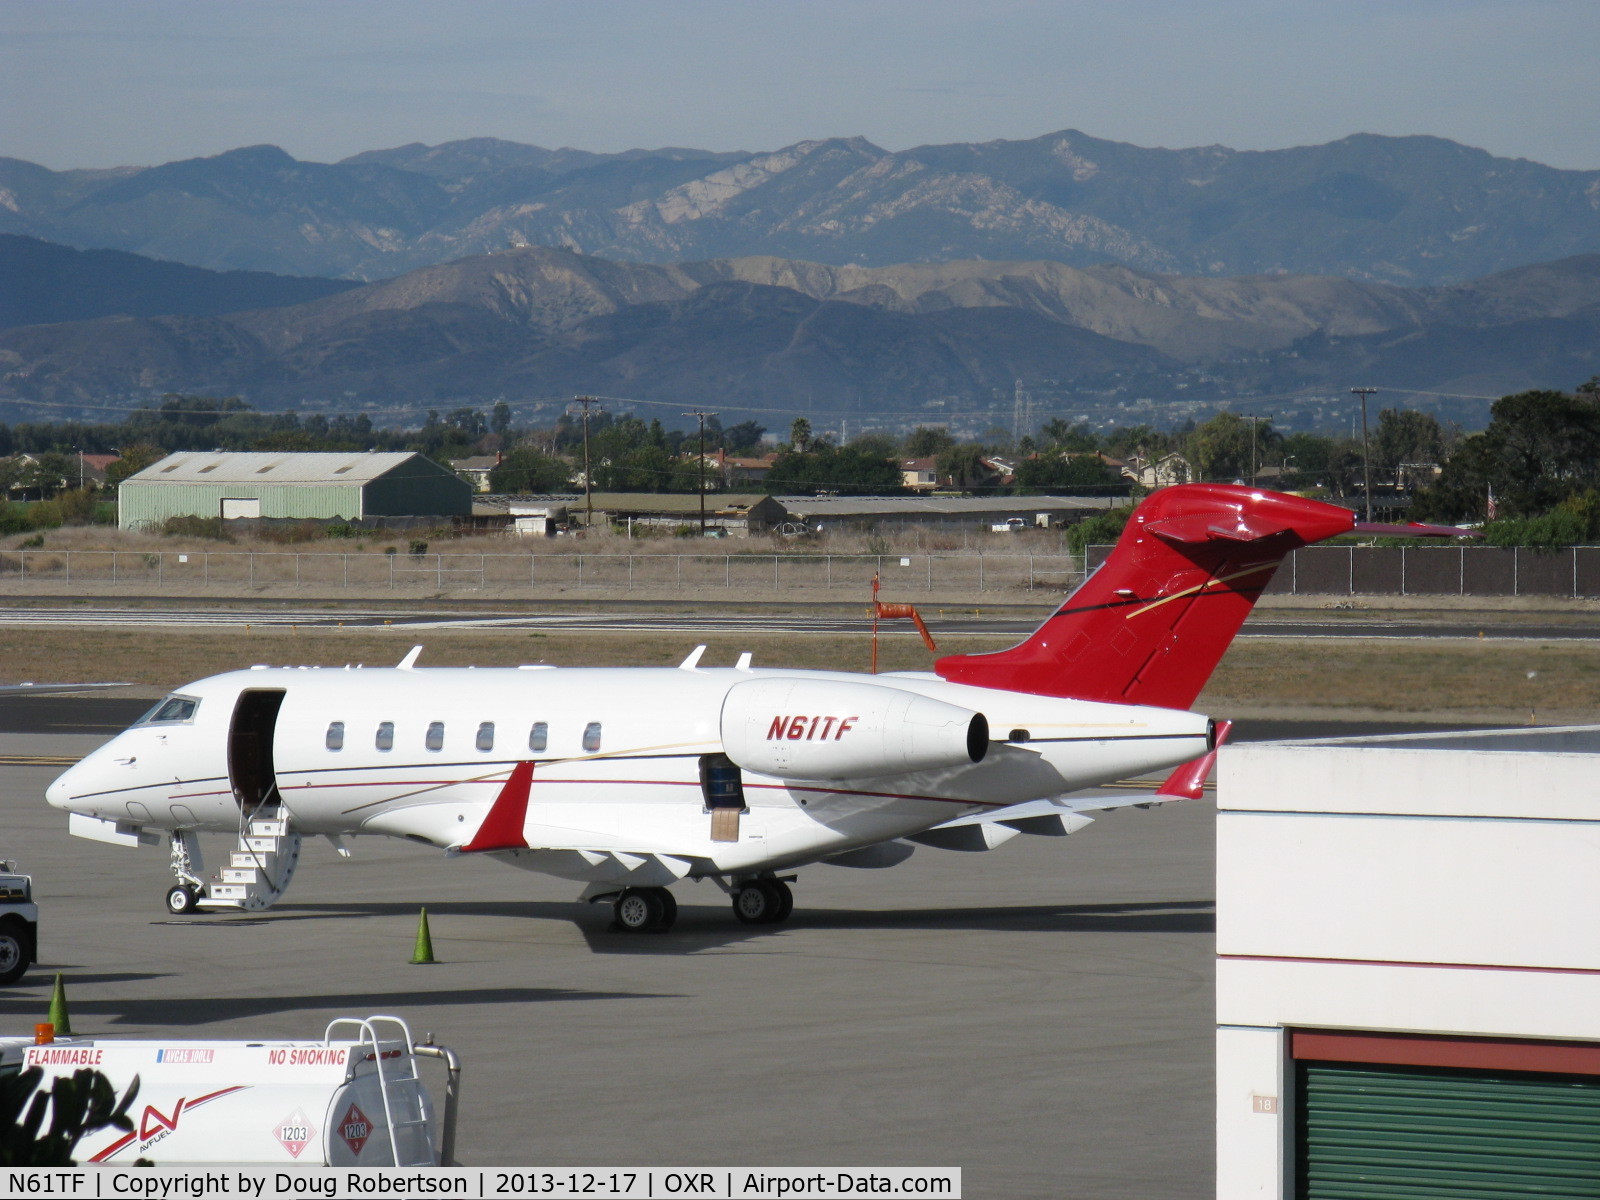 N61TF, 2006 Bombardier Challenger 300 (BD-100-1A10) C/N 20110, 2006 Bombardier BD-100-1A10 CHALLENGER 300, two Honeywell HTF1000 Turbofans with FADEC each flat rated to 6,500 lb st with APR to ISA + 15 deg. C. High cruise speed M0.82 470 kt 541 mph; Normal cruise M0.80 459 kt 528 mph. Max certified altitude 45,000'